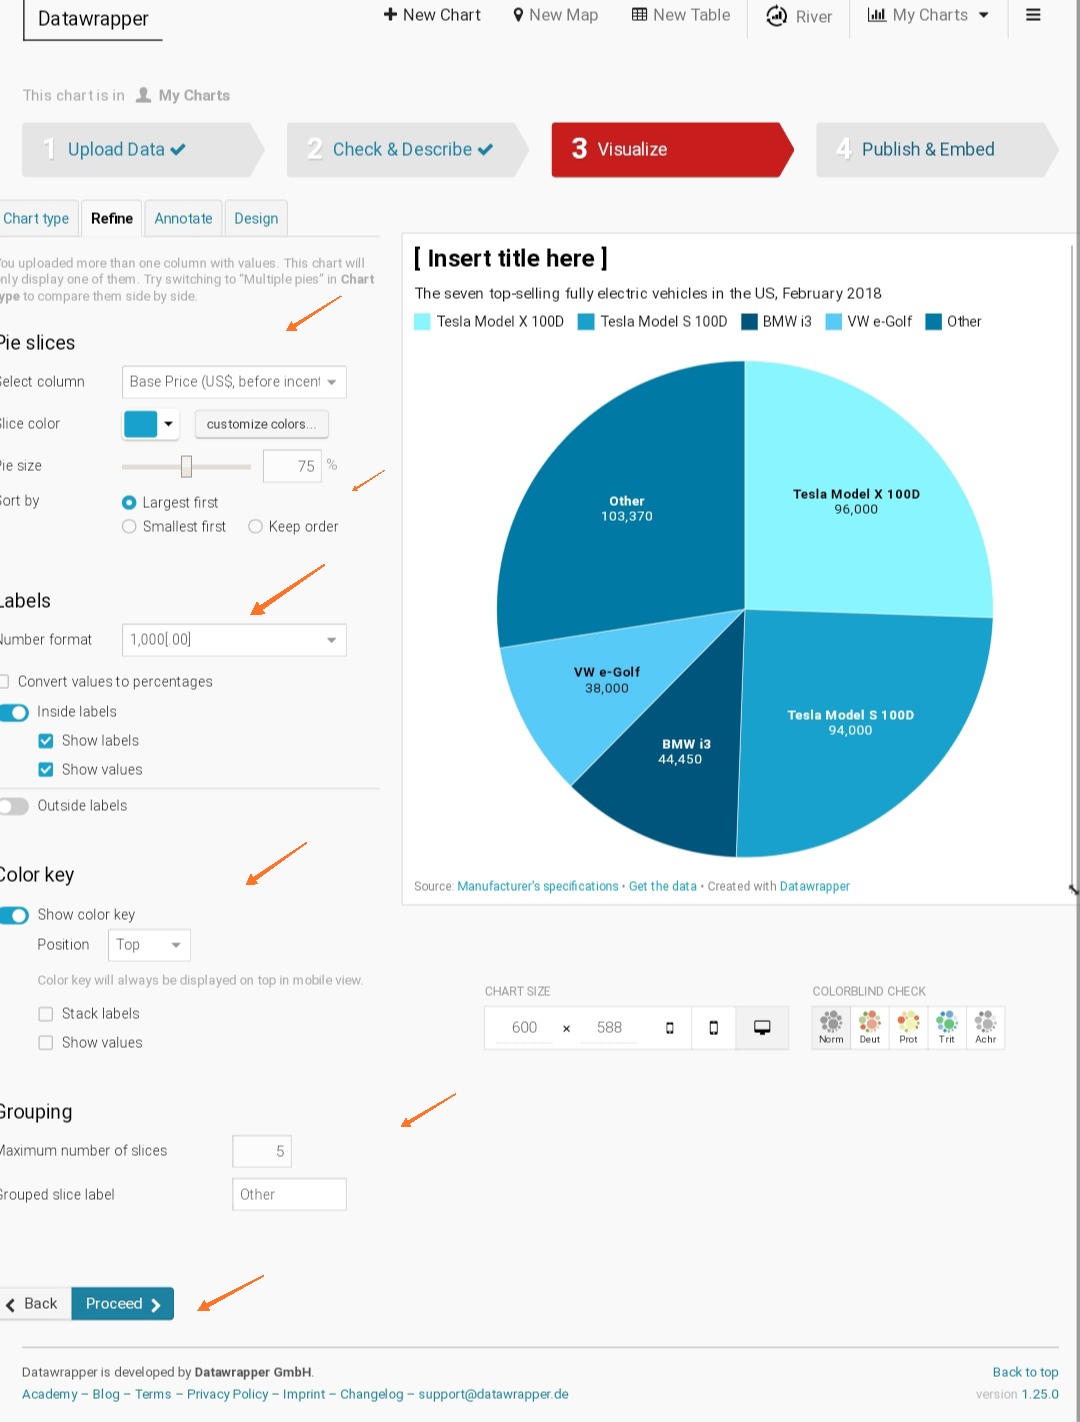 Embed graphs, charts, tables, map in blog